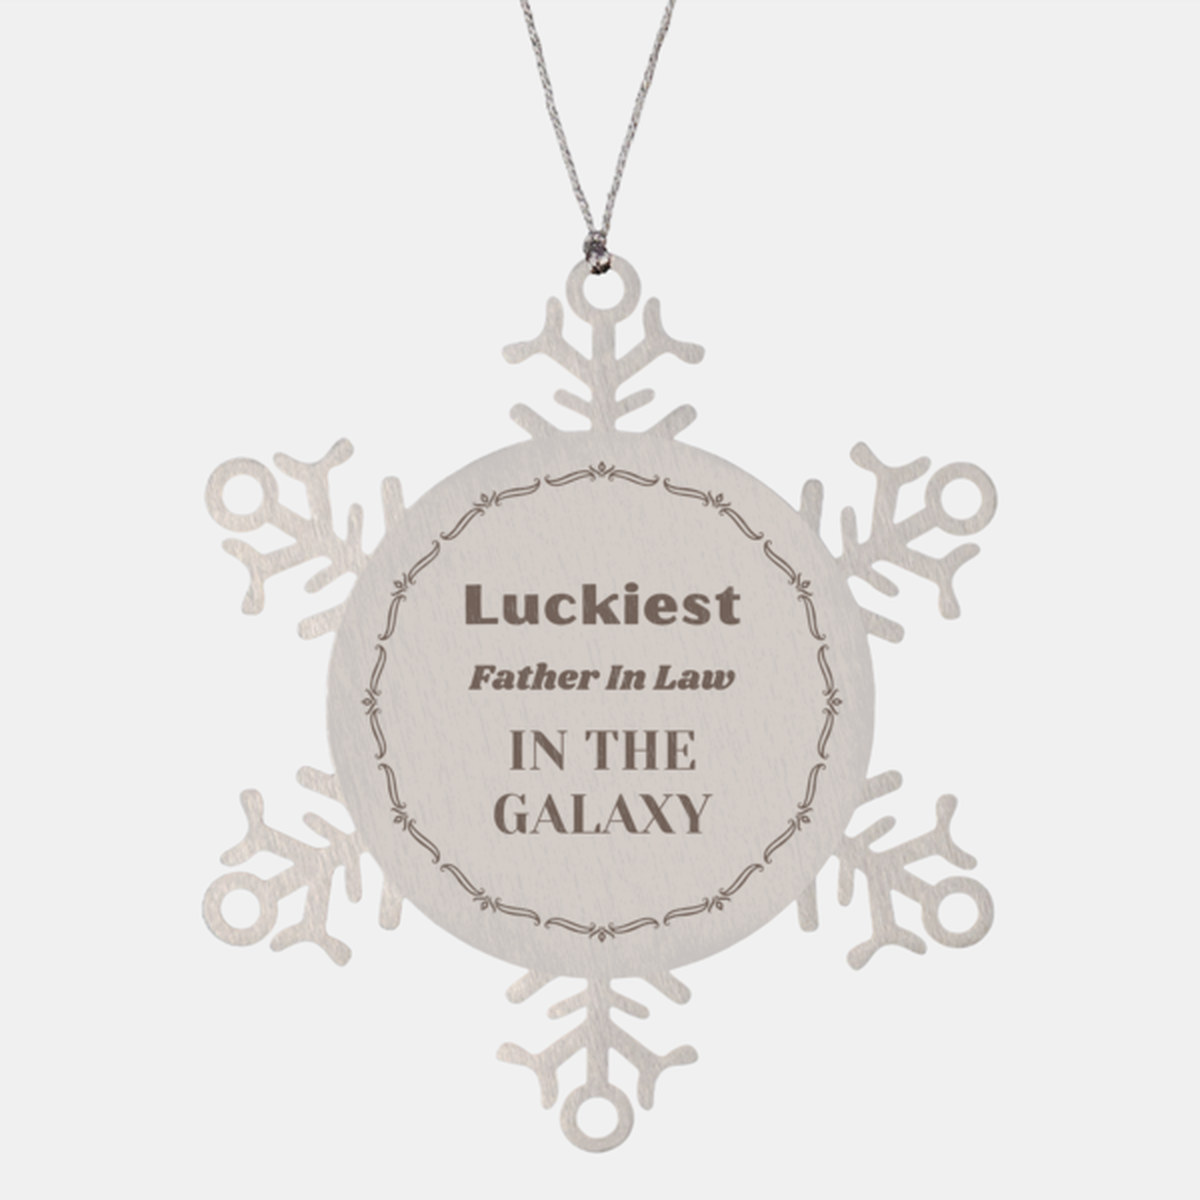 Luckiest Father In Law in the Galaxy, To My Father In Law Ornament Gifts, Christmas Father In Law Snowflake Ornament Gifts, X-mas Decorations Unique Gifts For Father In Law Men Women